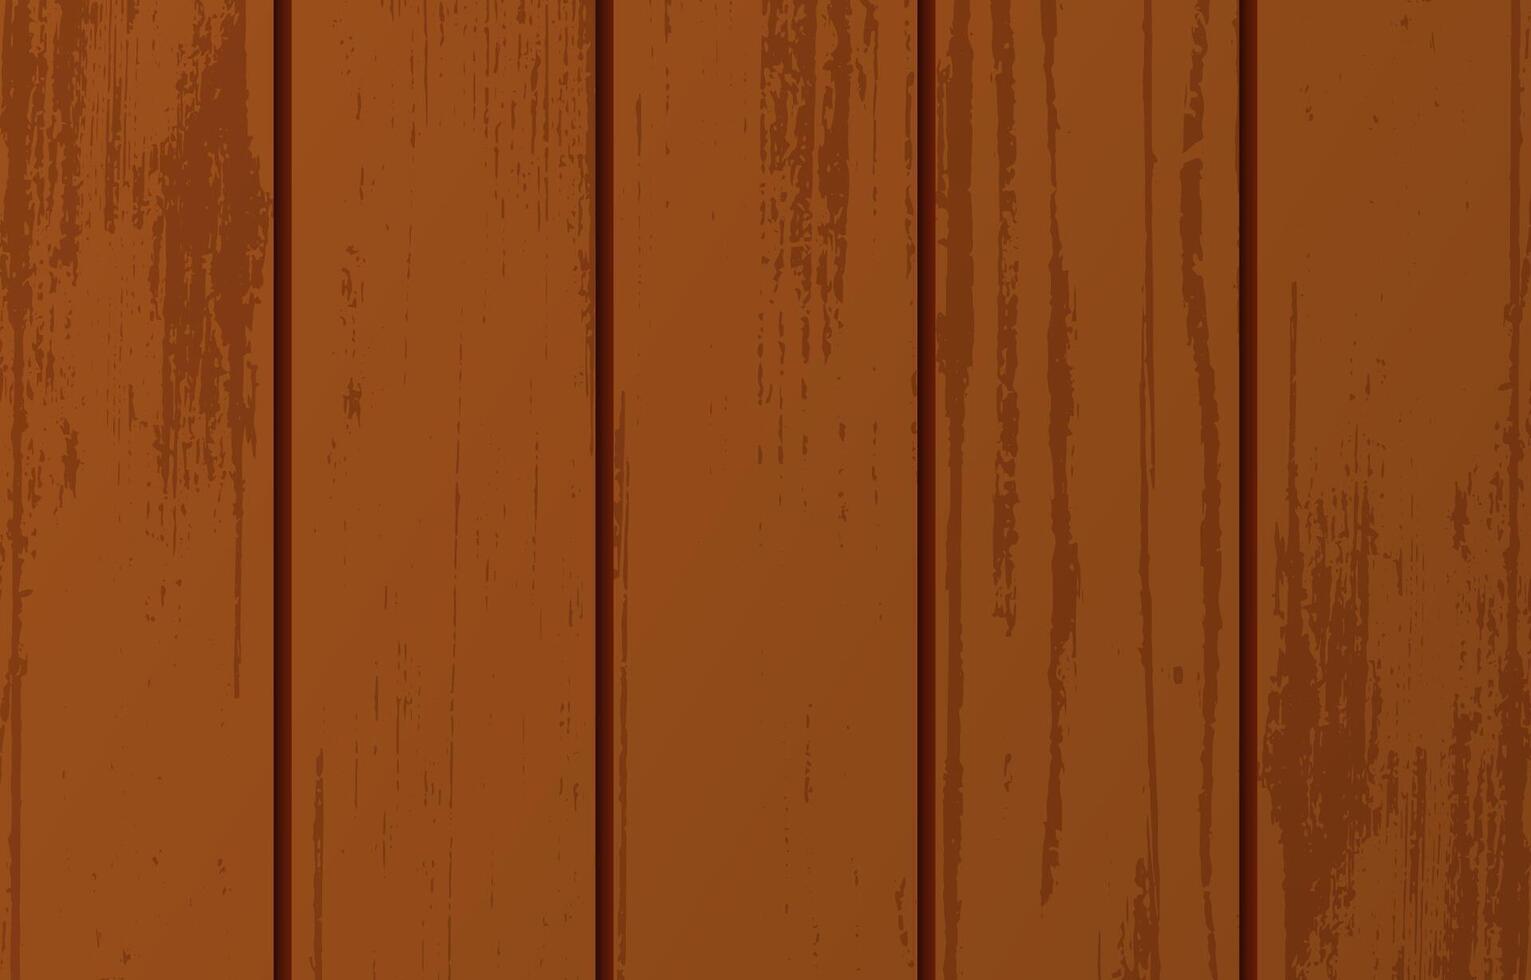 Realistic Wooden Rustic Texture Background vector